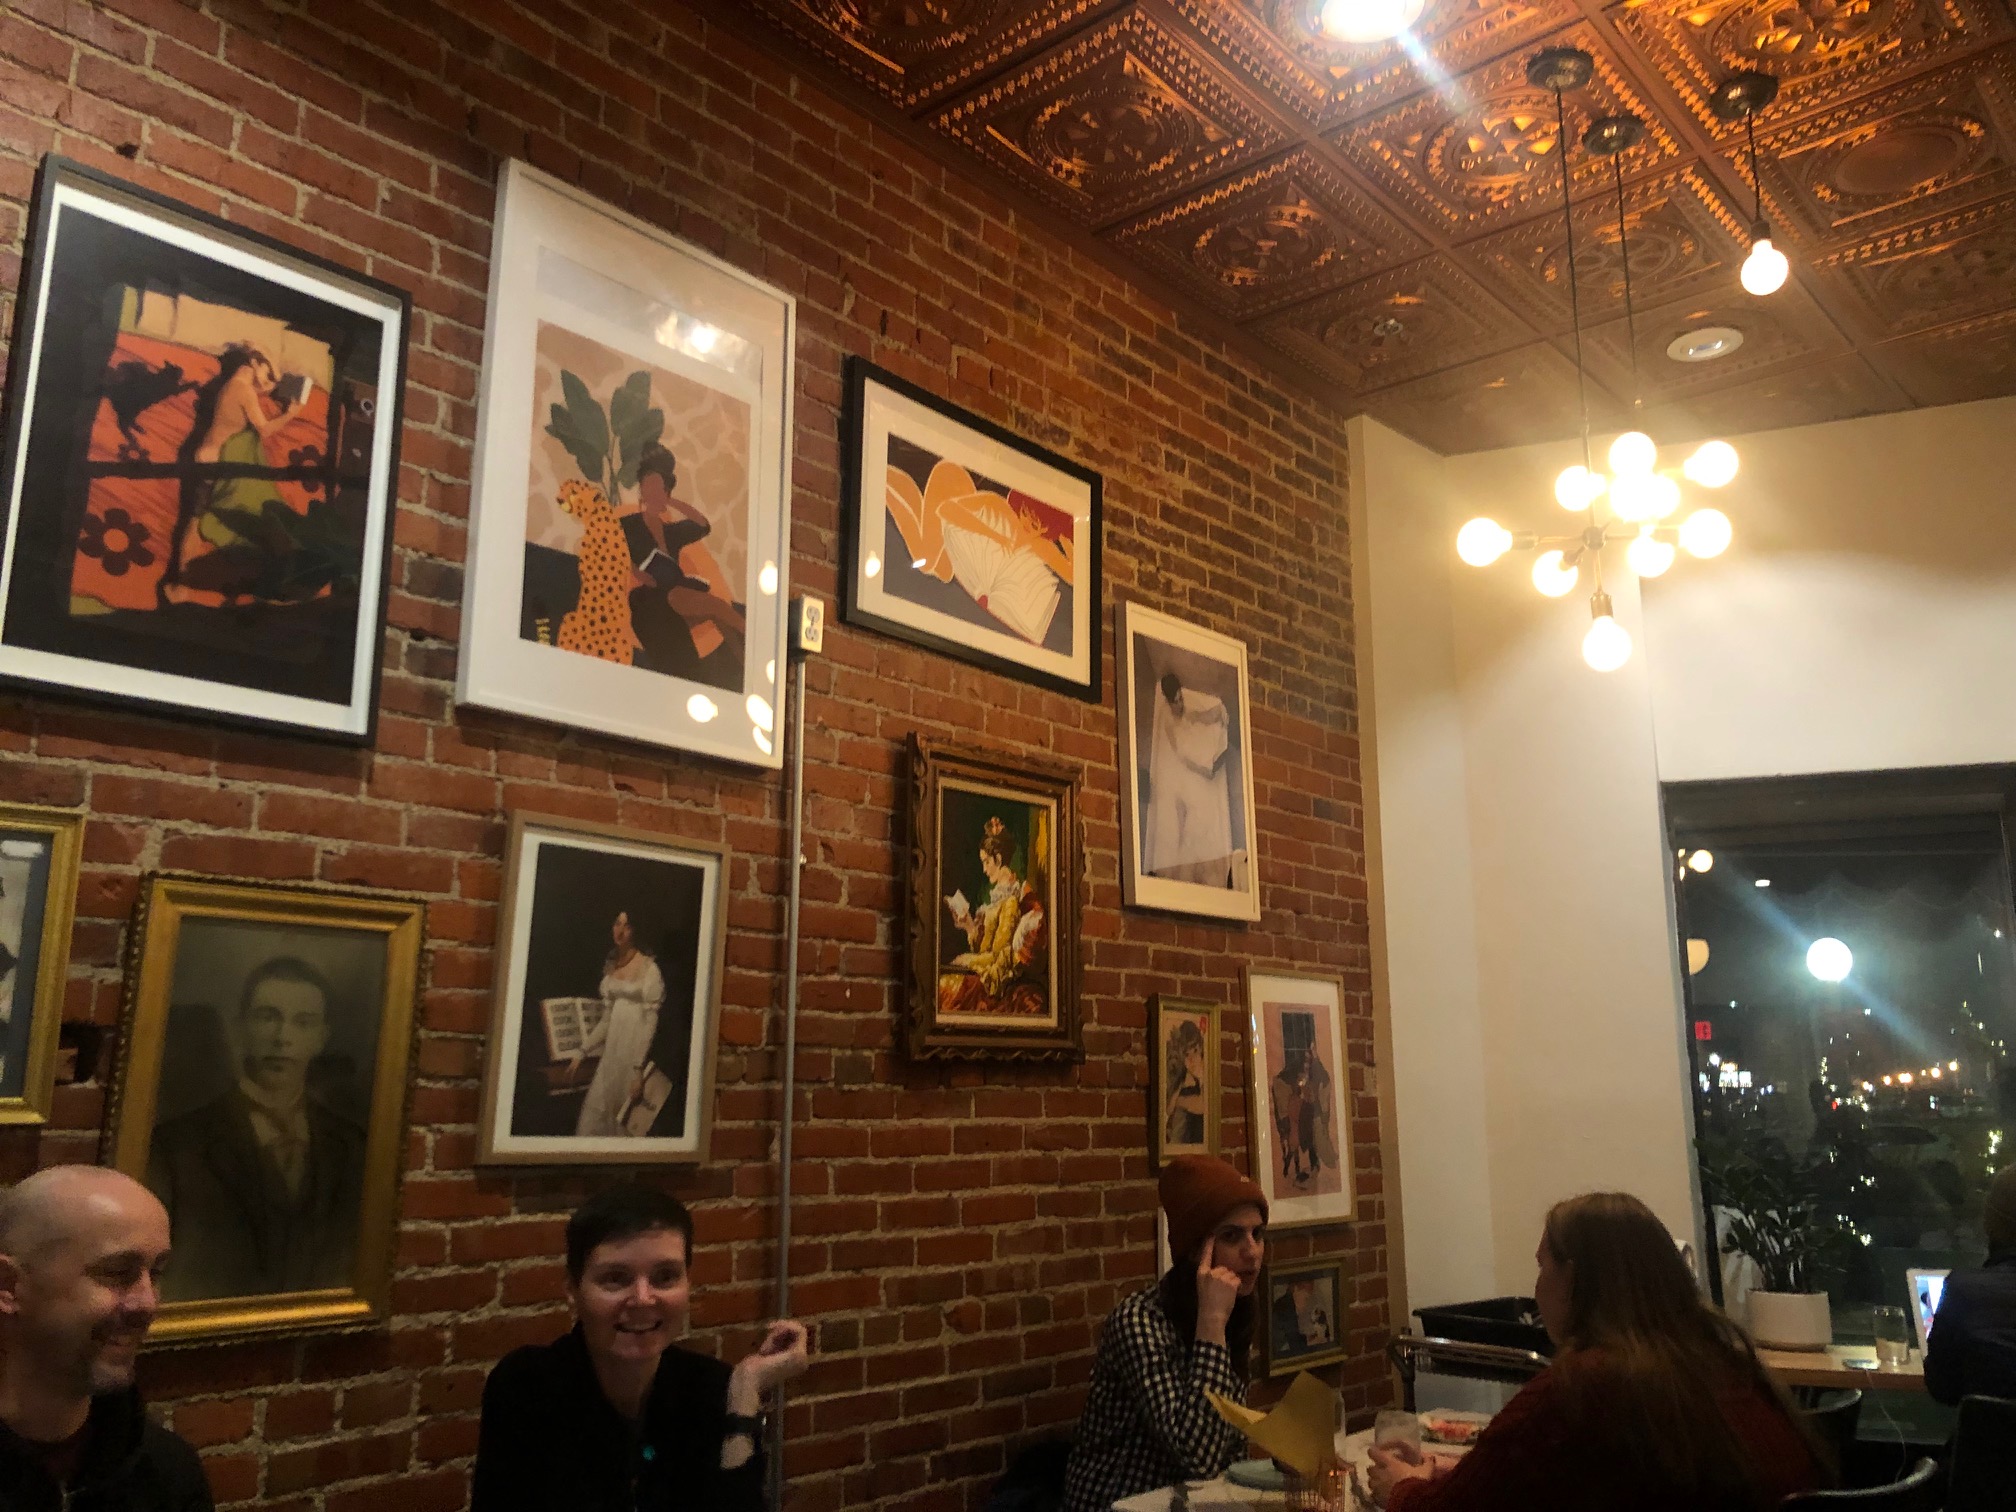 Inside The Literary, there are lots of framed artwork in a gallery wall on a brick wall. There are diners, unmasked, smiling on a Thursday evening.  Photo by Alyssa Buckley.